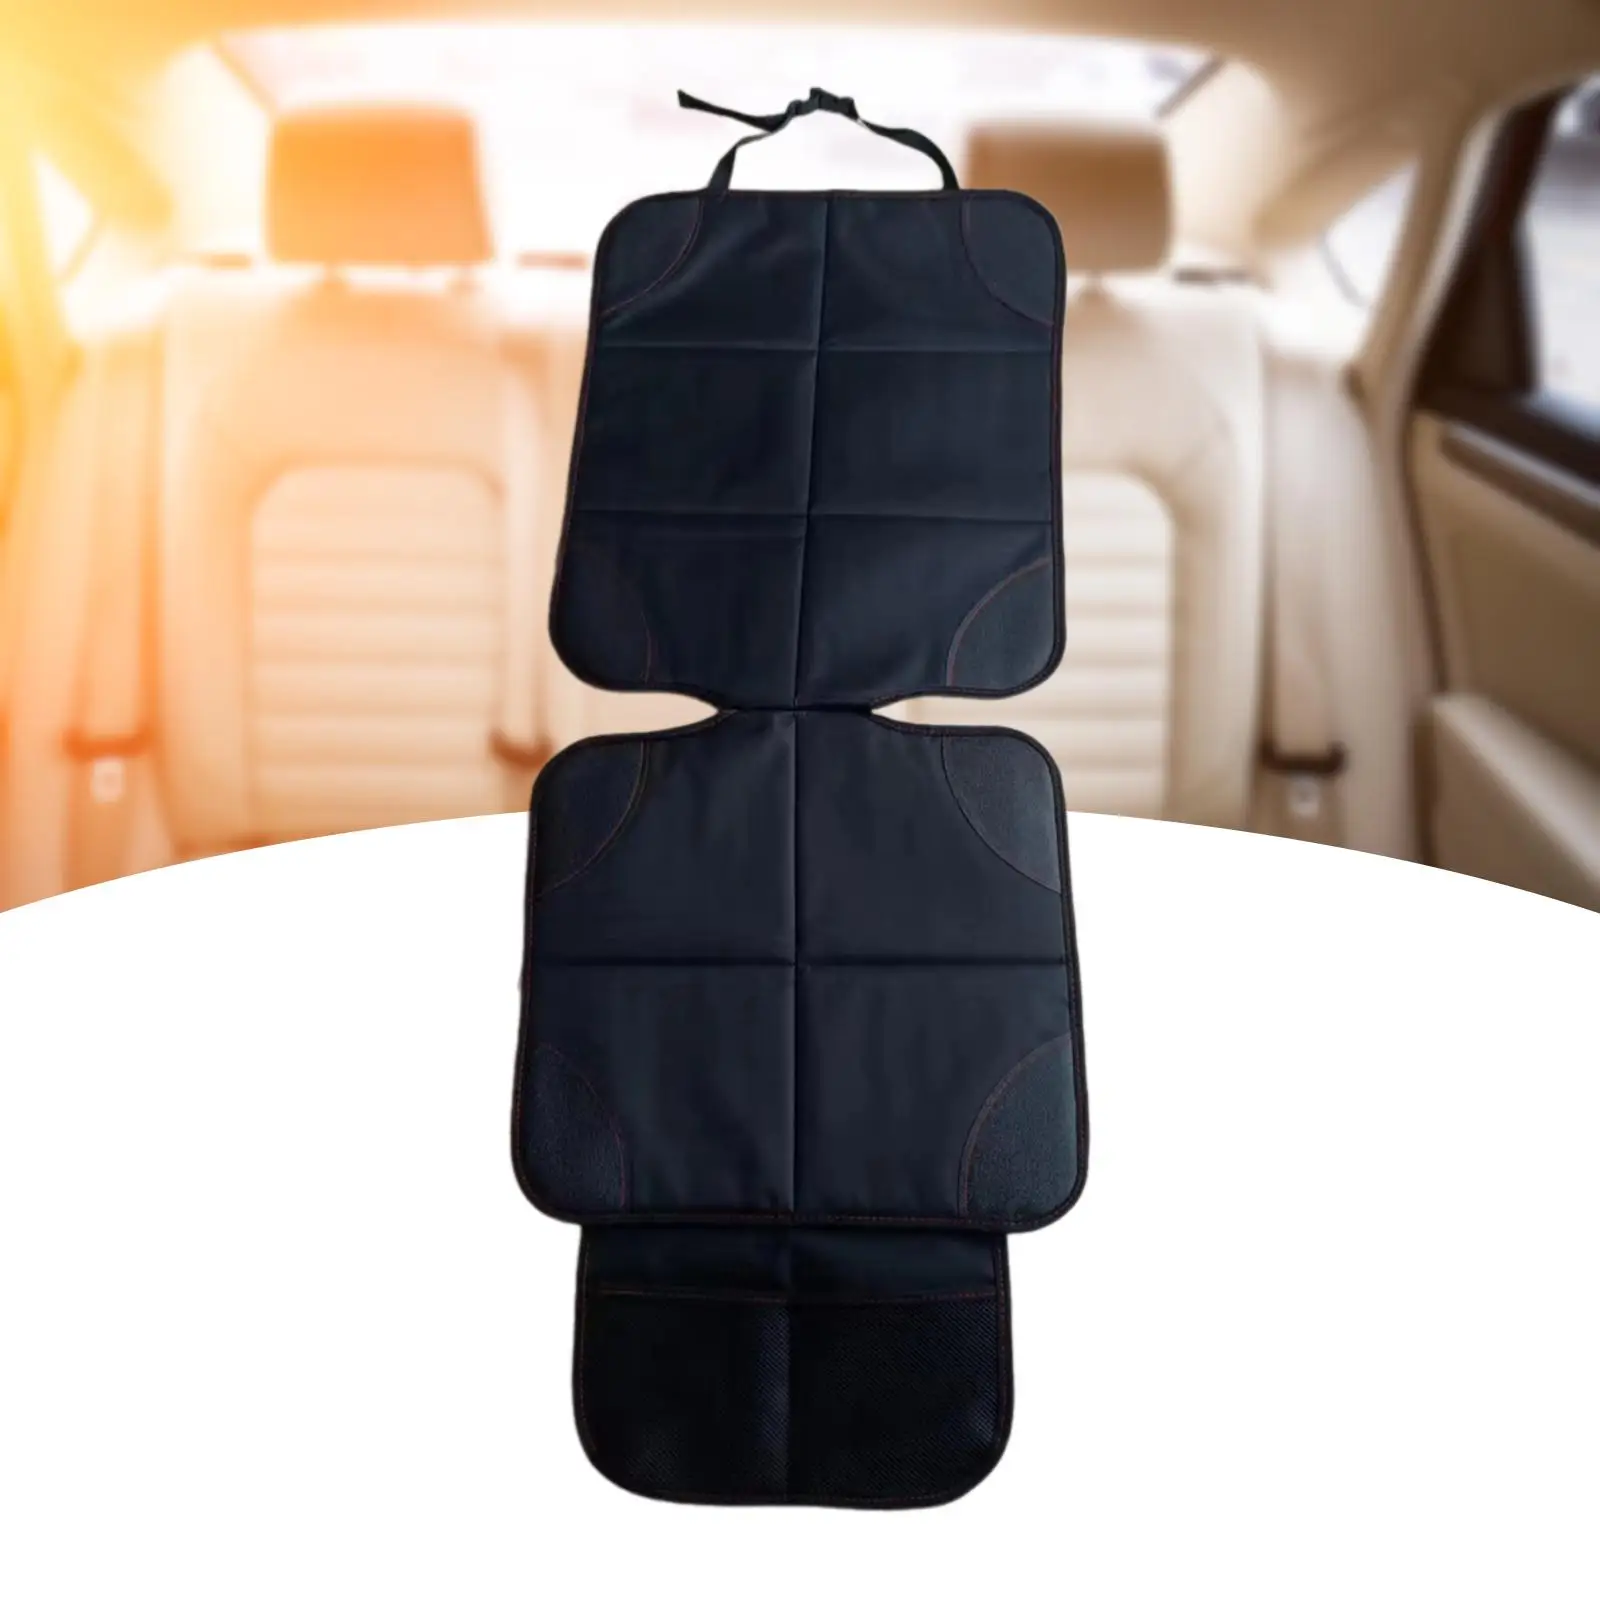 Seat Cover Mat Nonslip Back Seat Truck Car Seat Protector for Child Car Seat